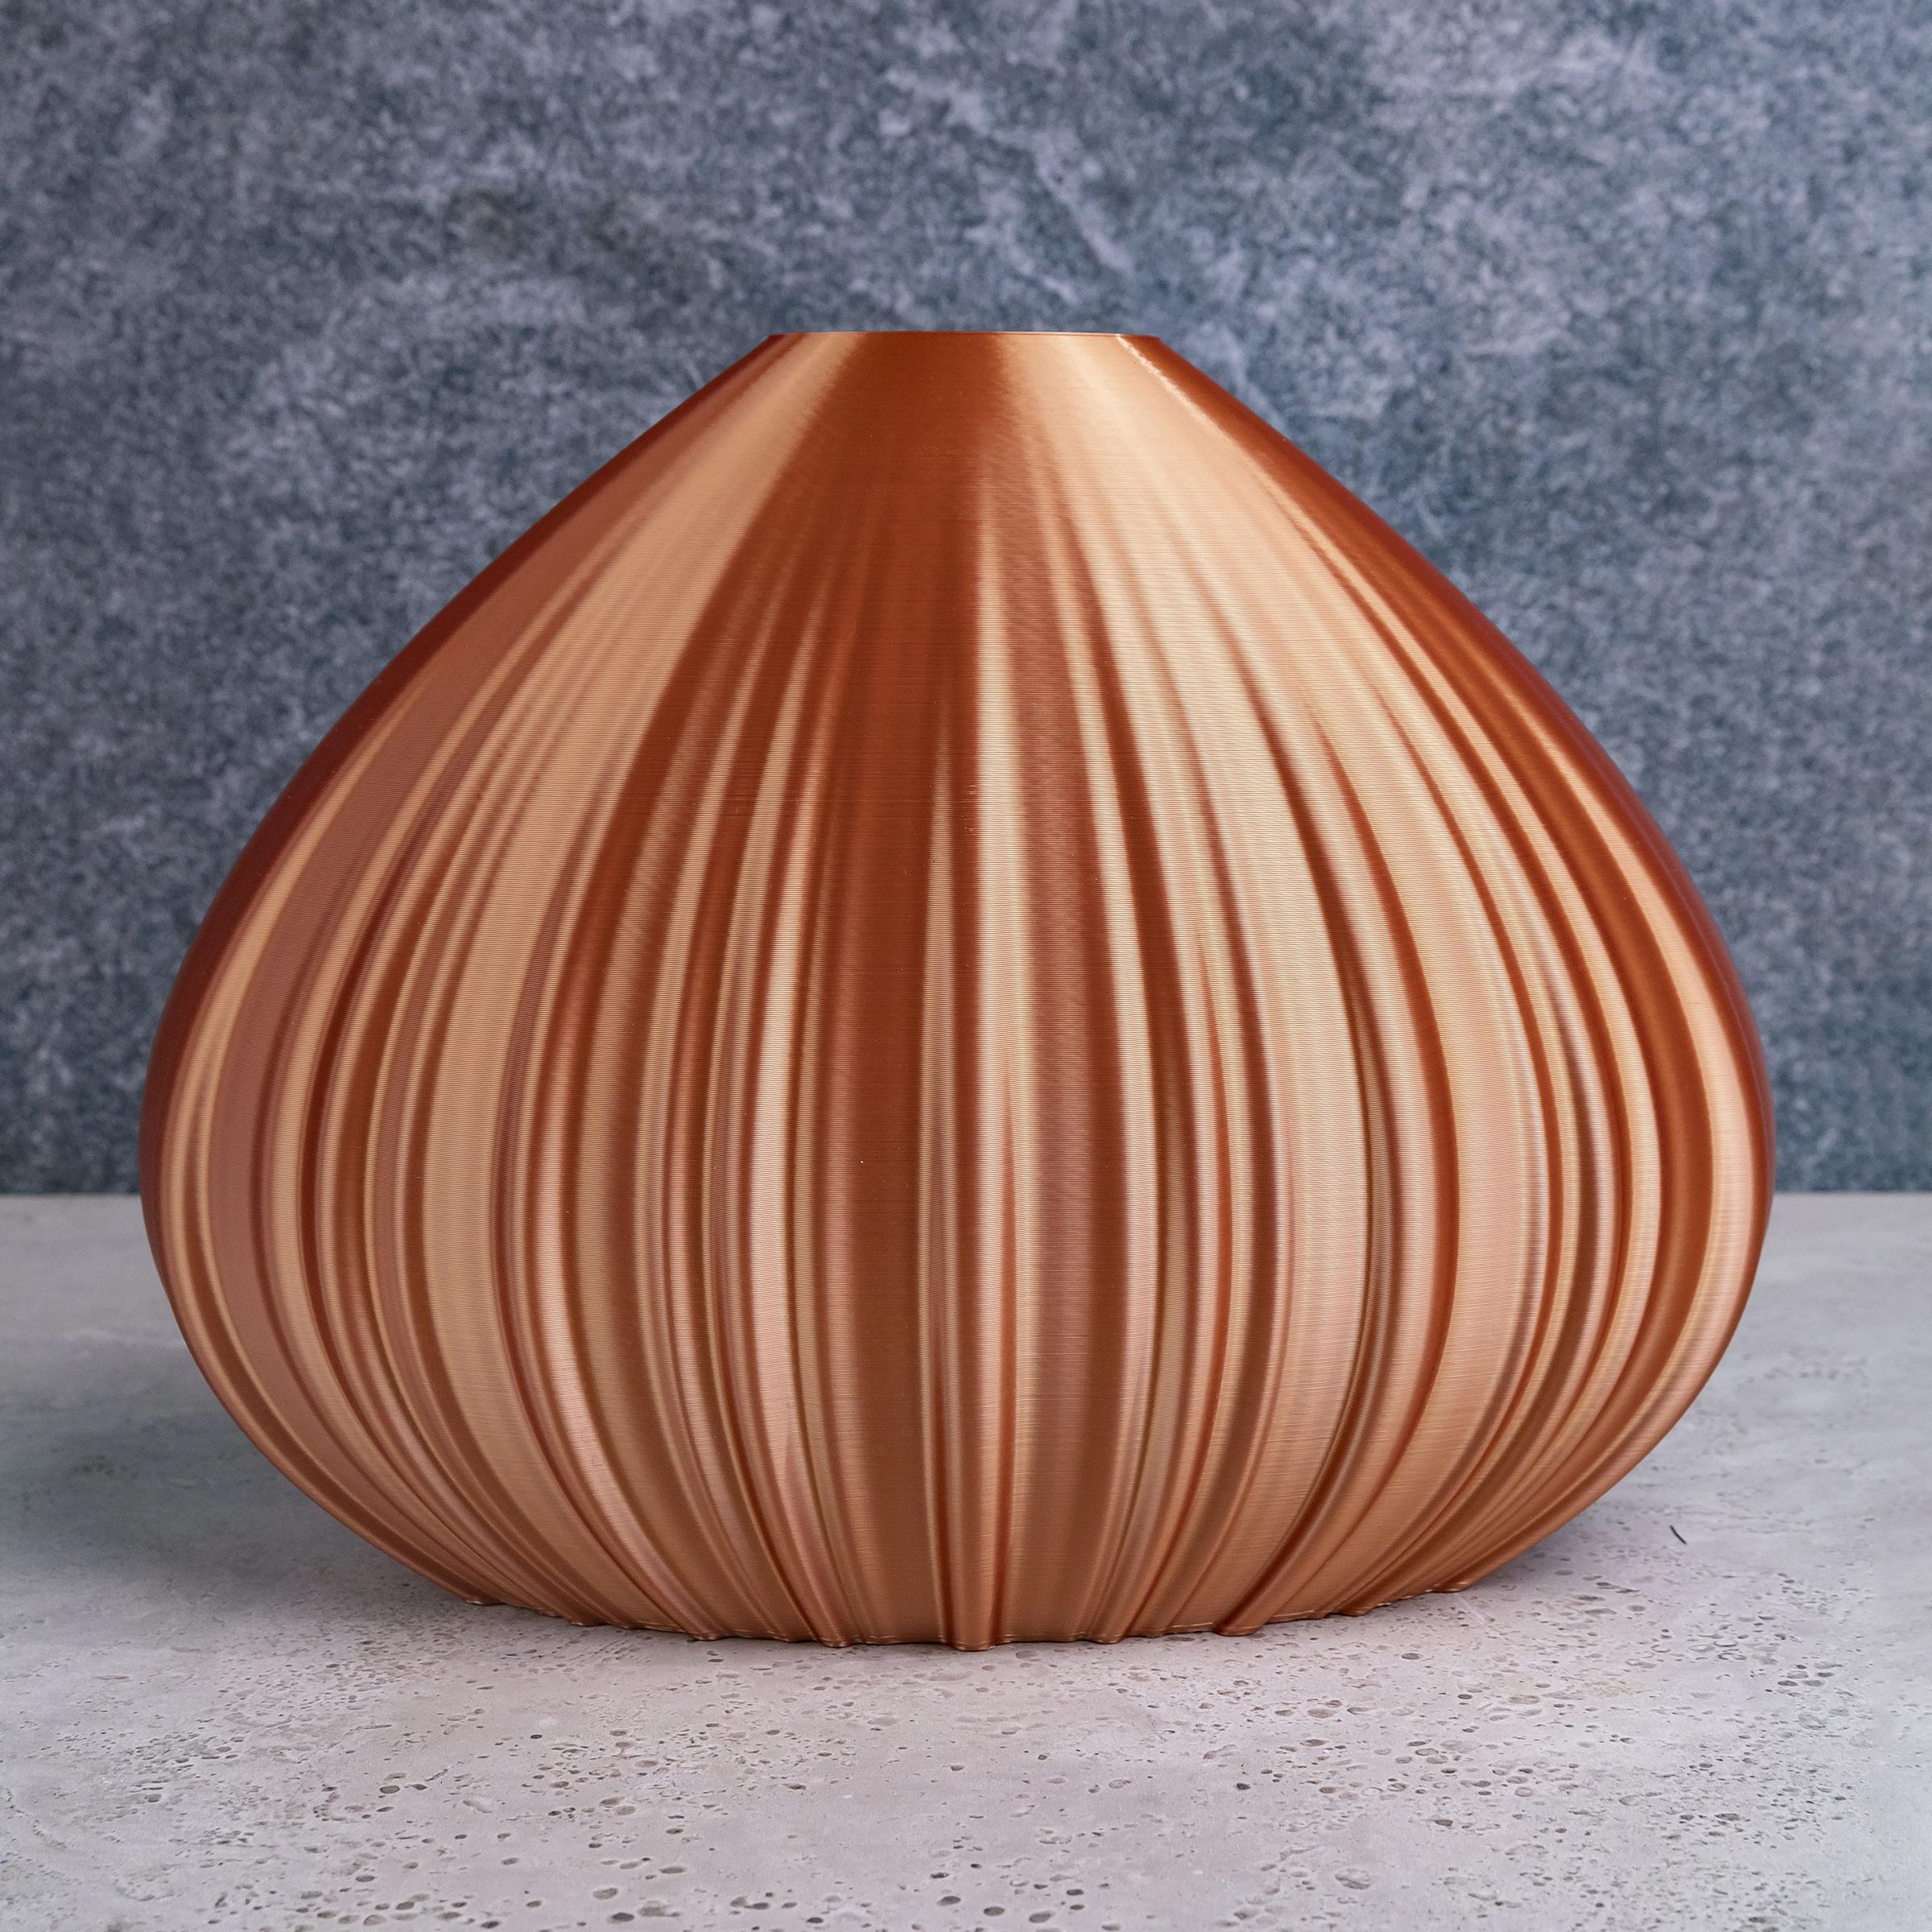 Vase-sculpture by DygoDesign

Showcasing an elegant drop-shaped profile, this gorgeous decorative sculpture is a singular design vase inspired by a chestnut. Fashioned of sustainable materials, its organic silhouette is finished in a mesmerizing